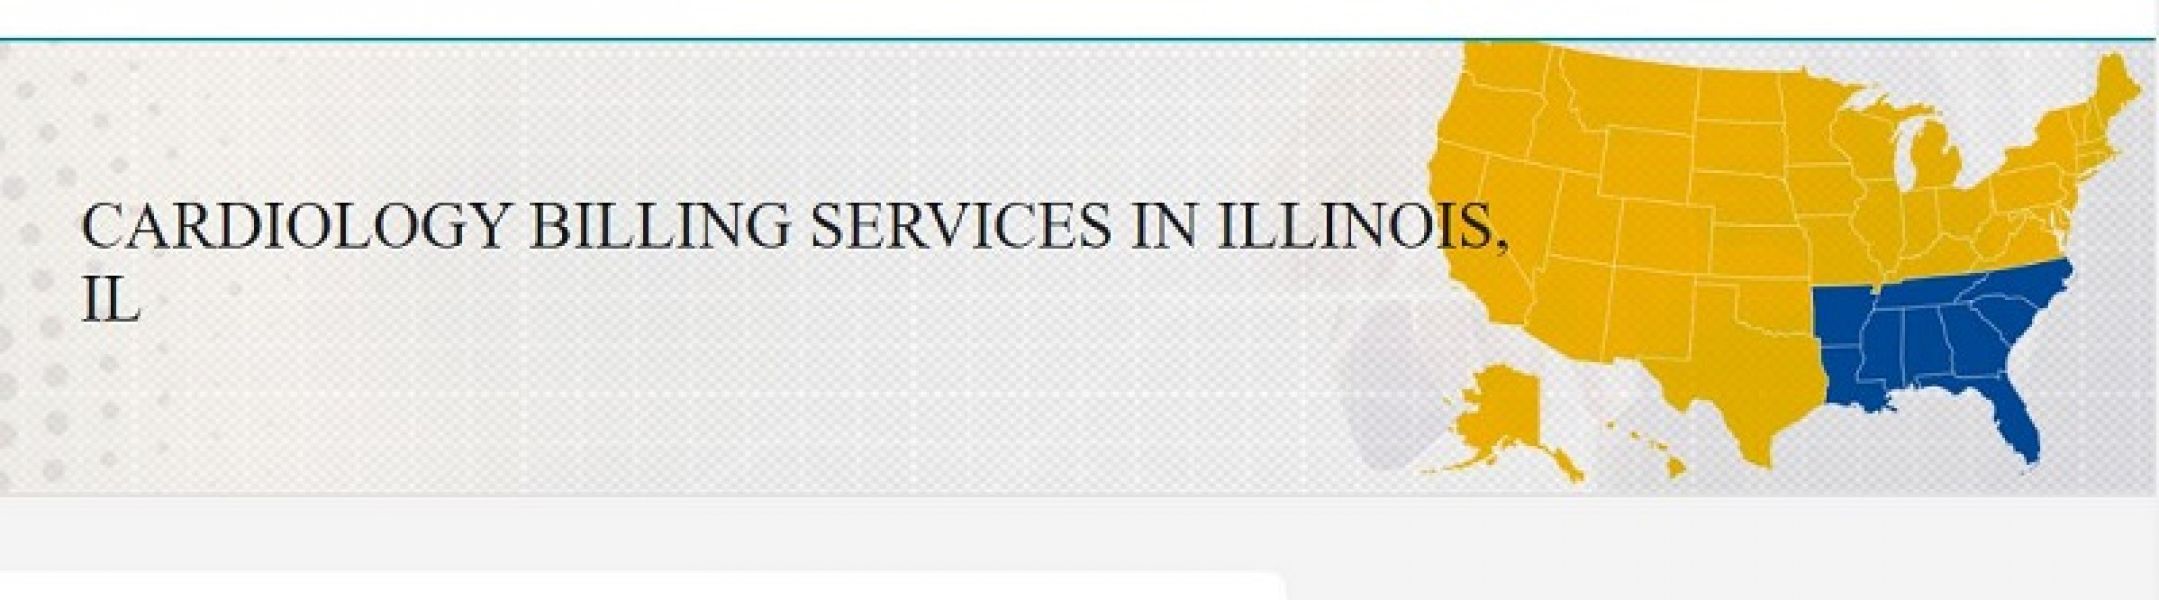 Cardiology Billing Services for Illinois, IL